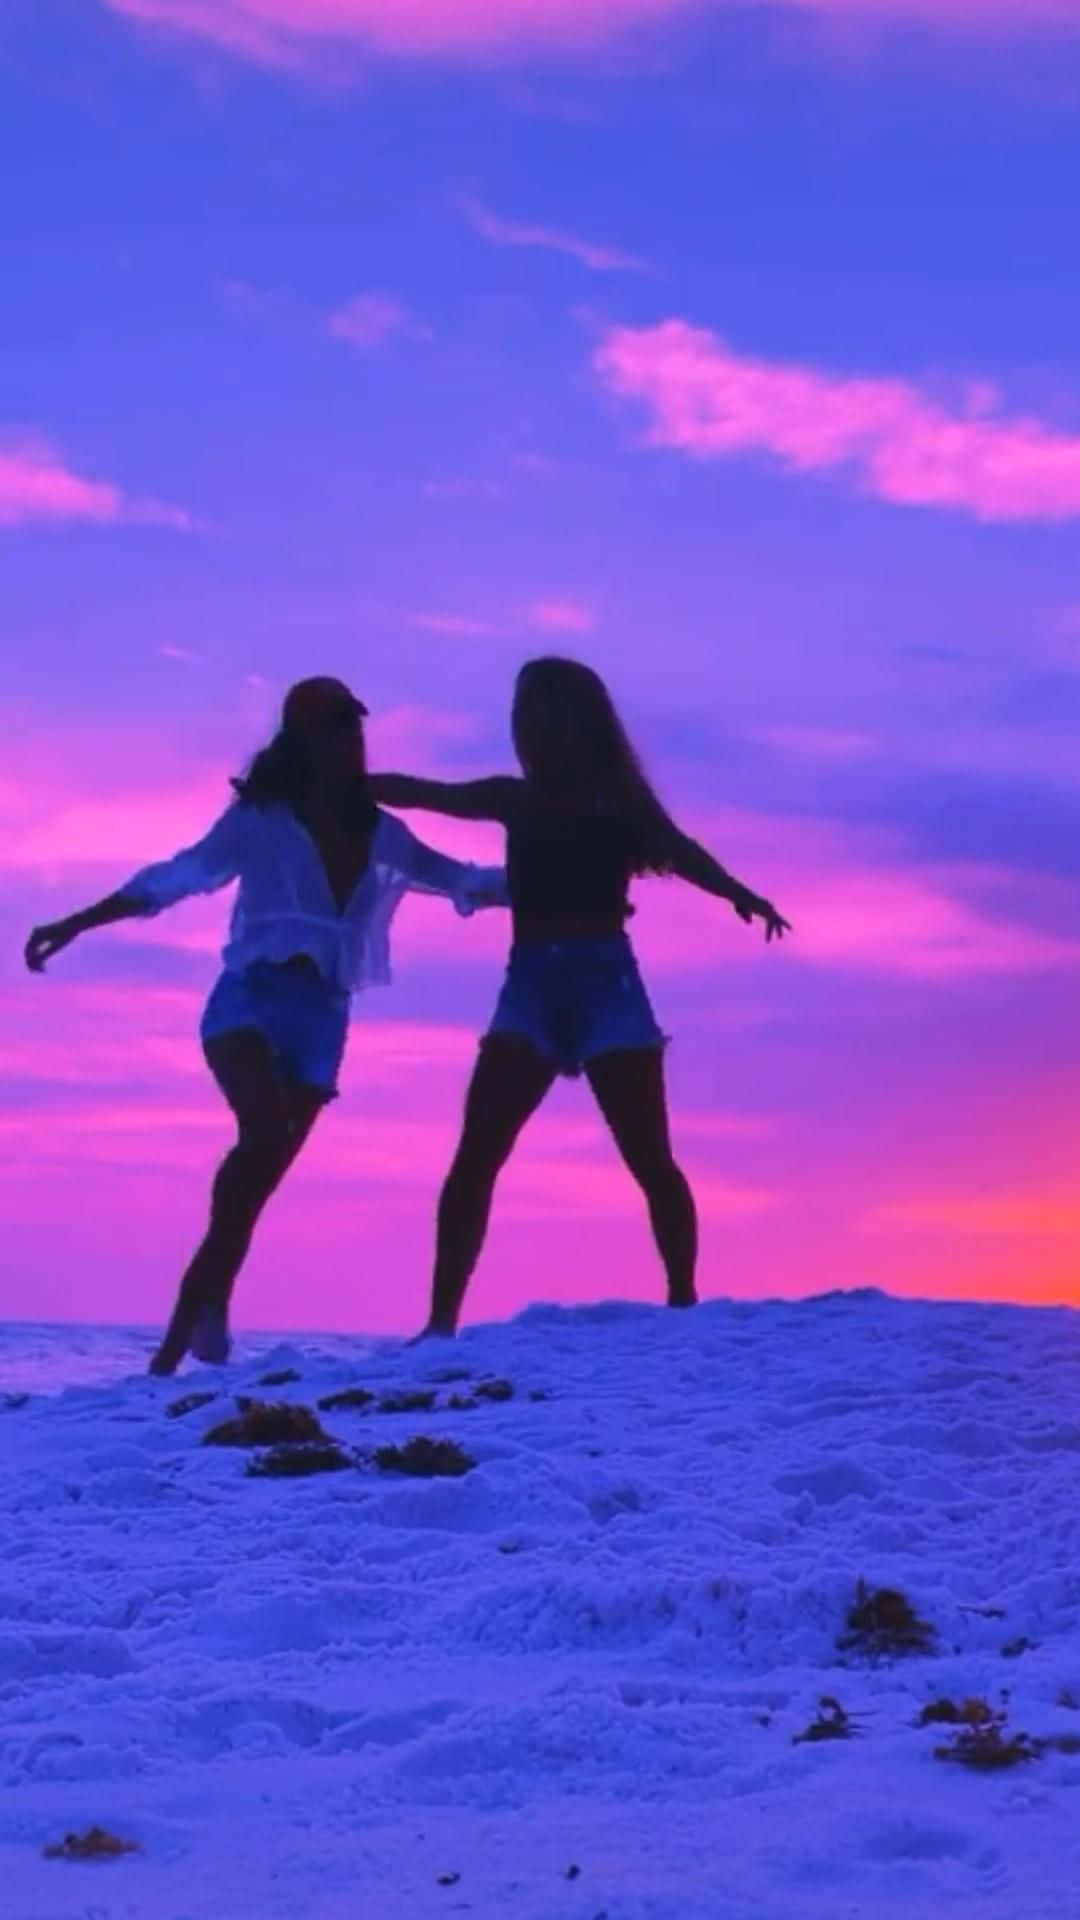 Two Girls Standing On The Beach At Sunset